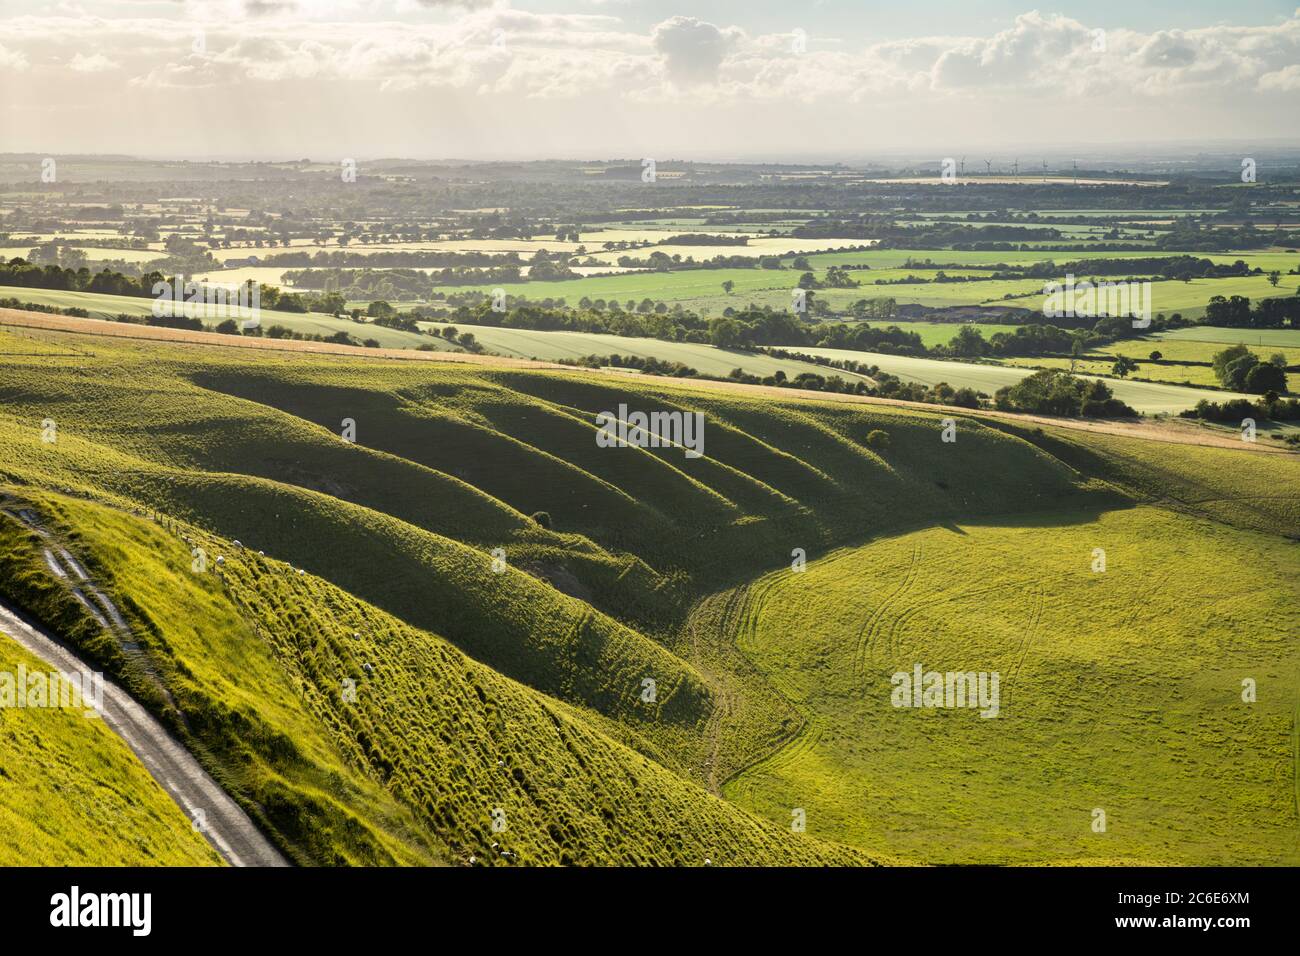 The Manger and Vale of White Horse vue de White Horse Hill, Uffington, Oxfordshire, Angleterre, Royaume-Uni, Europe Banque D'Images